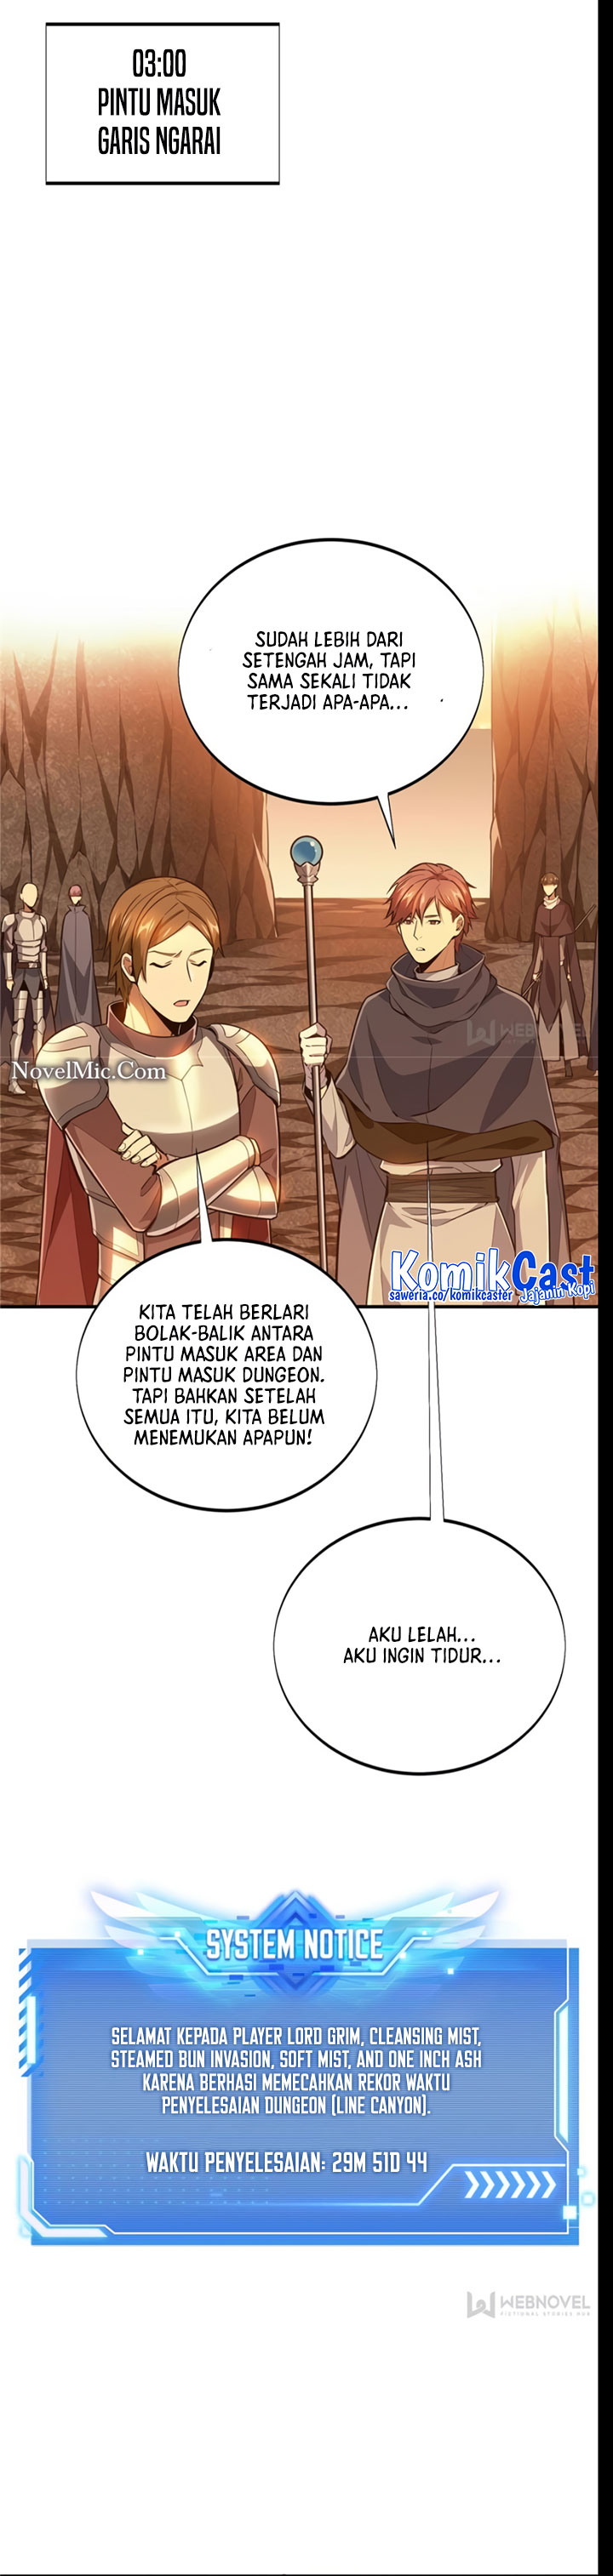 The King’s Avatar (2020) Chapter 95